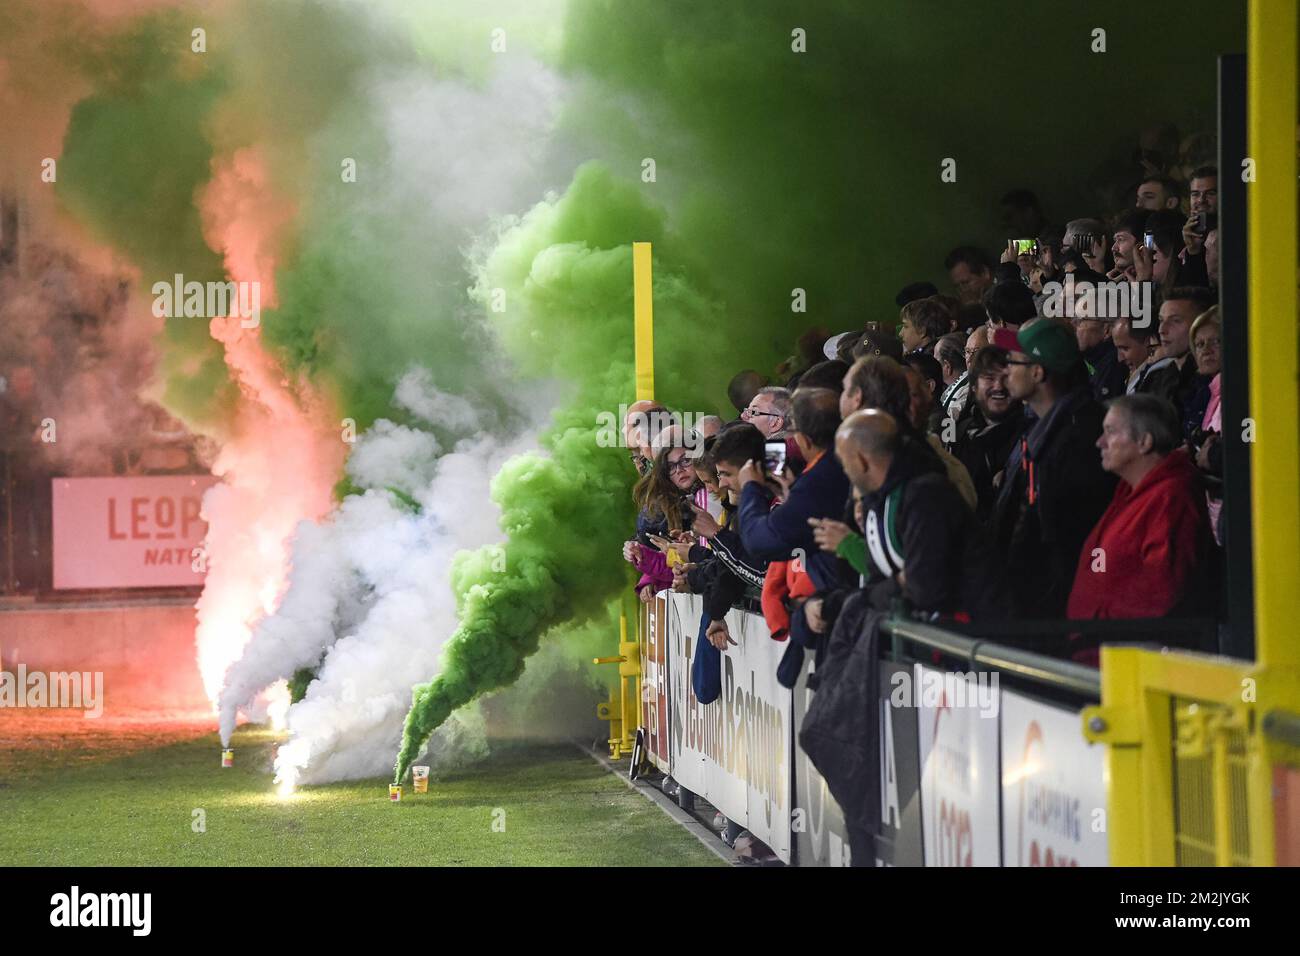 Virton's supporters pictured during a soccer game between Royal Excelsior Virton (First amateur division) and KAA Gent (JPL, D1), Wednesday 26 September 2018 in Virton, in the 1/16th final of the 'Croky Cup' Belgian cup. BELGA PHOTO LAURIE DIEFFEMBACQ Stock Photo